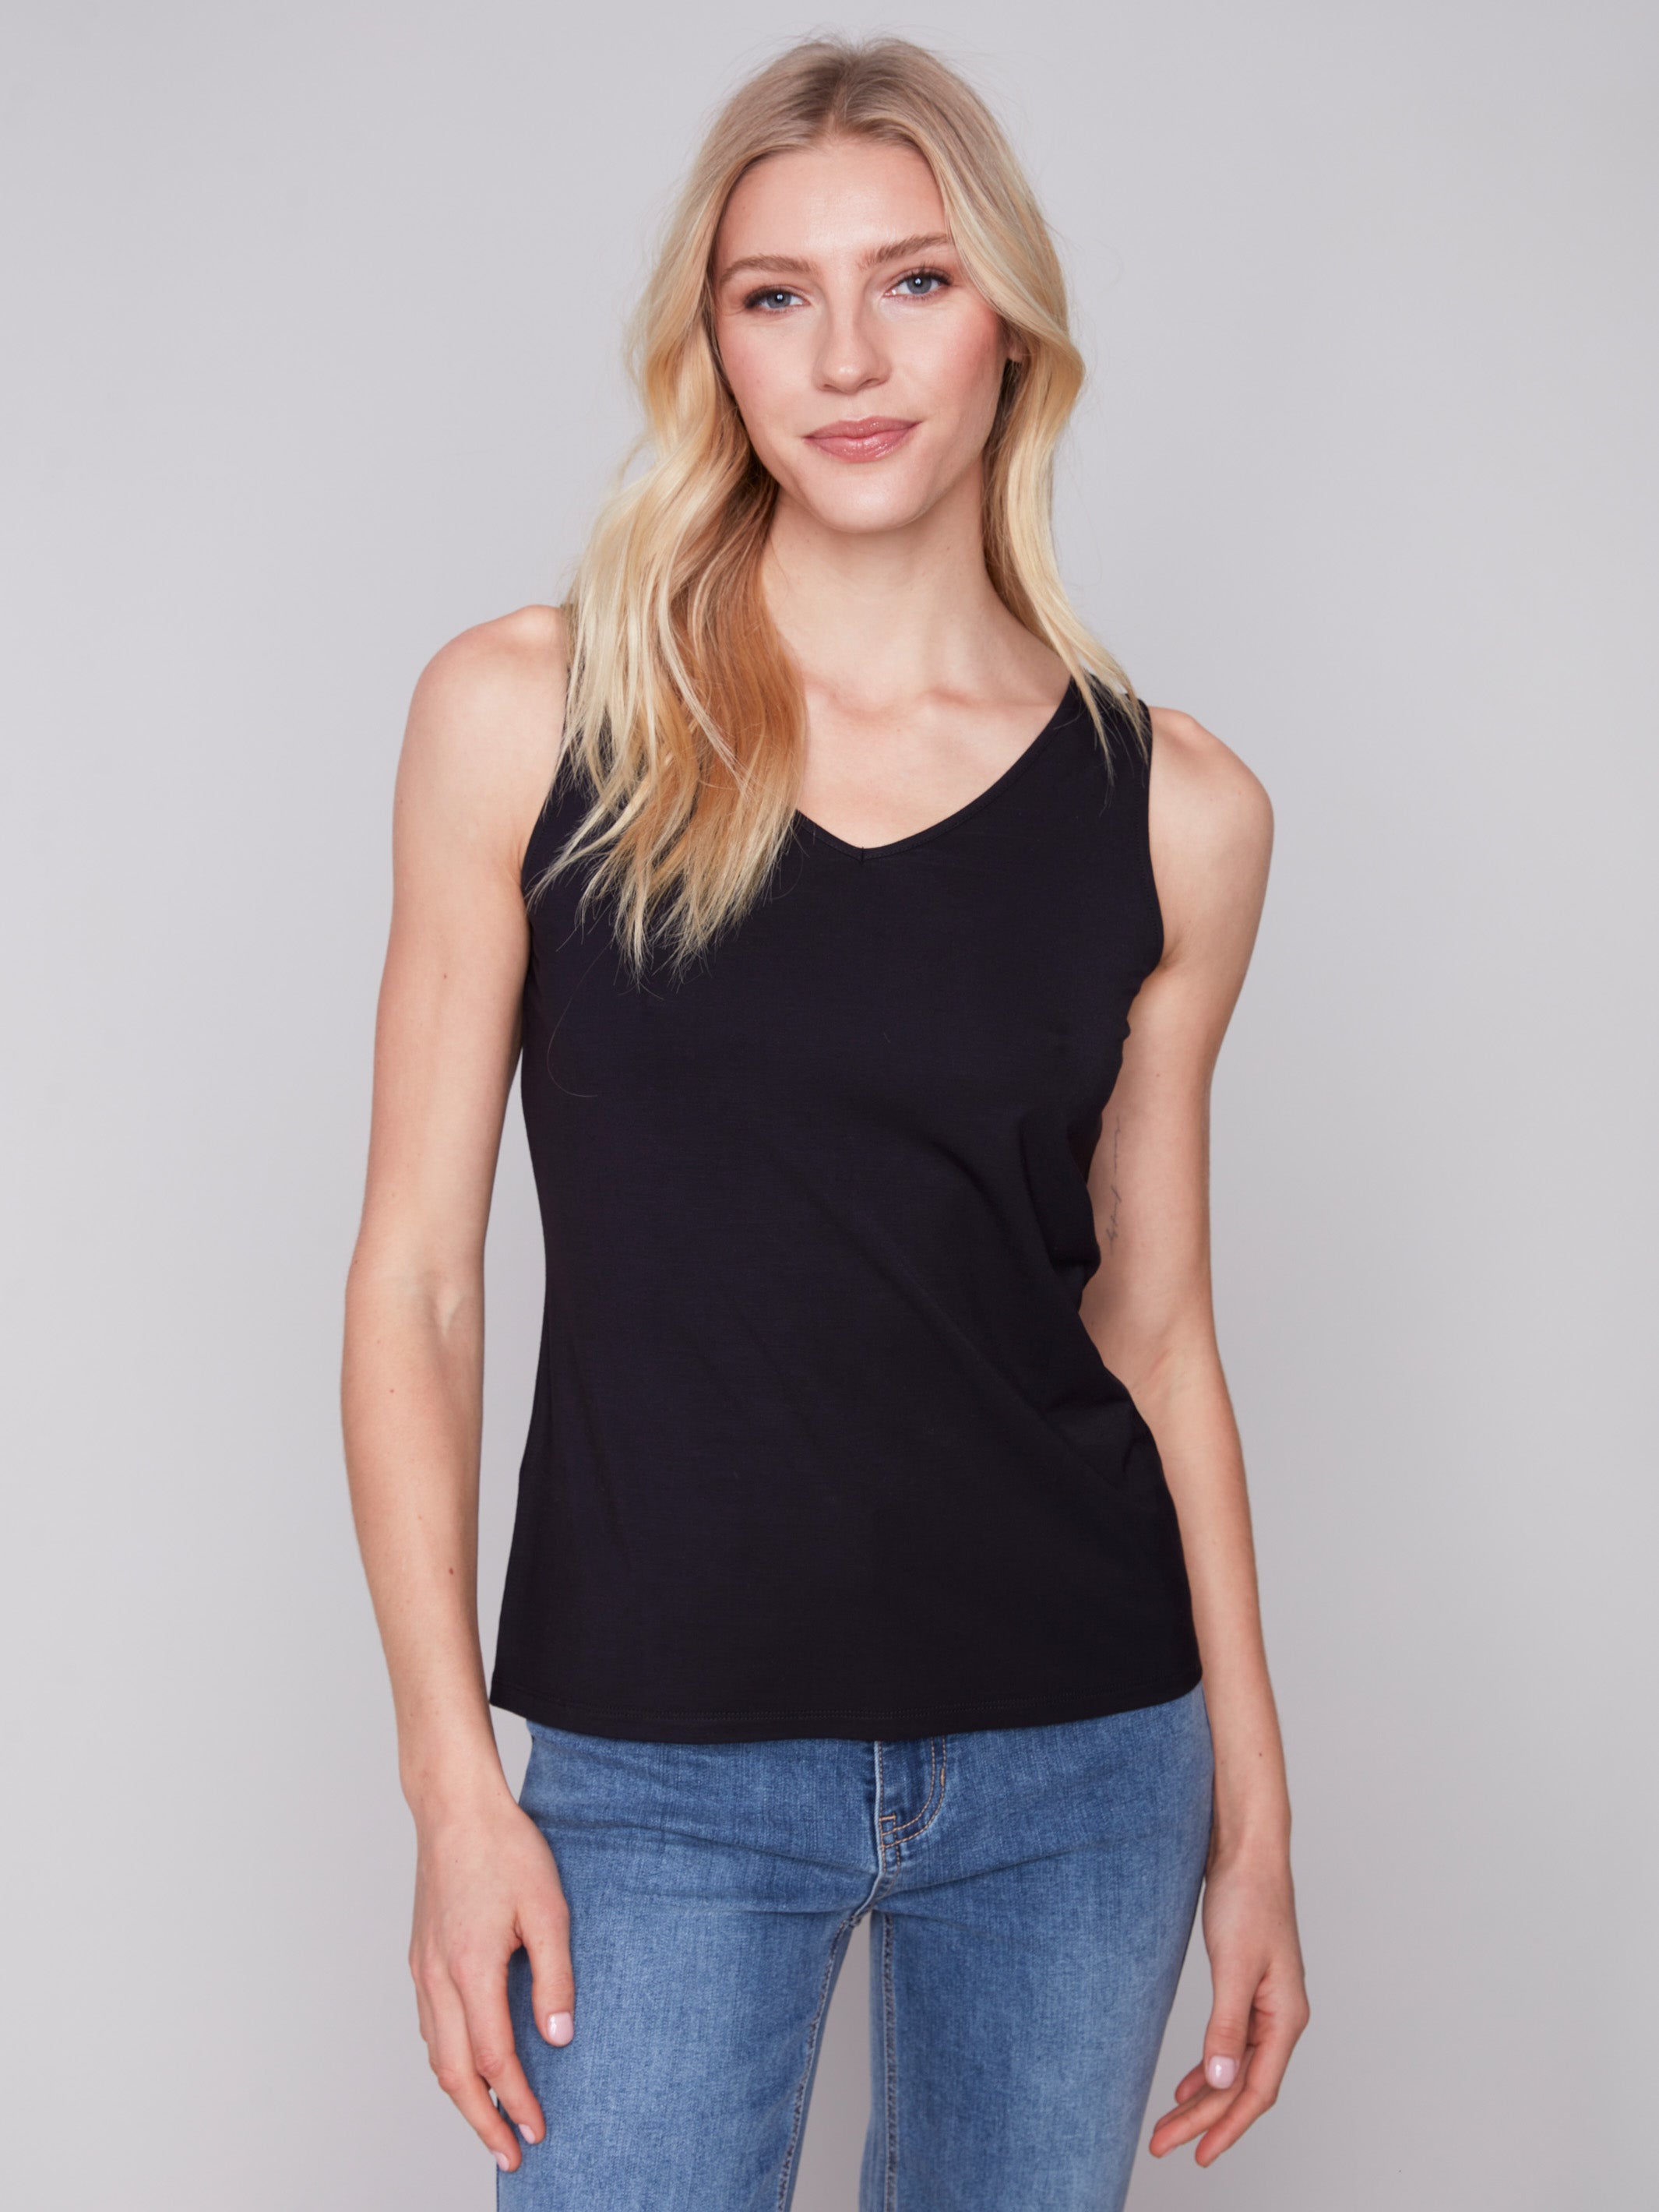 Reversible Bamboo Cami - Black - Charlie B Collection Canada - Image 6